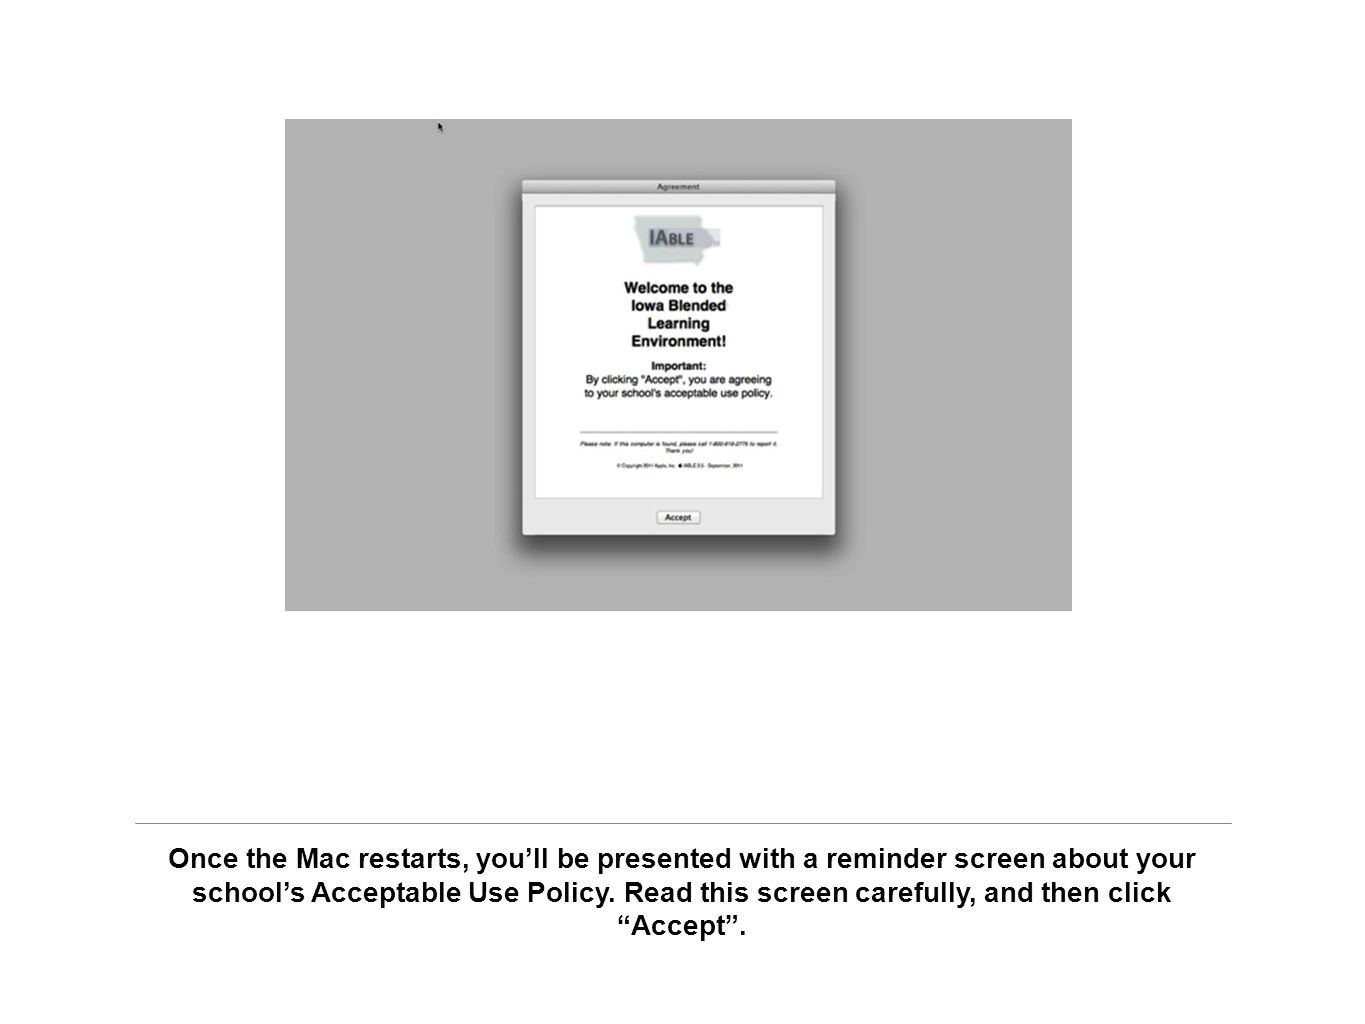 Once the Mac restarts, you’ll be presented with a reminder screen about your school’s Acceptable Use Policy.